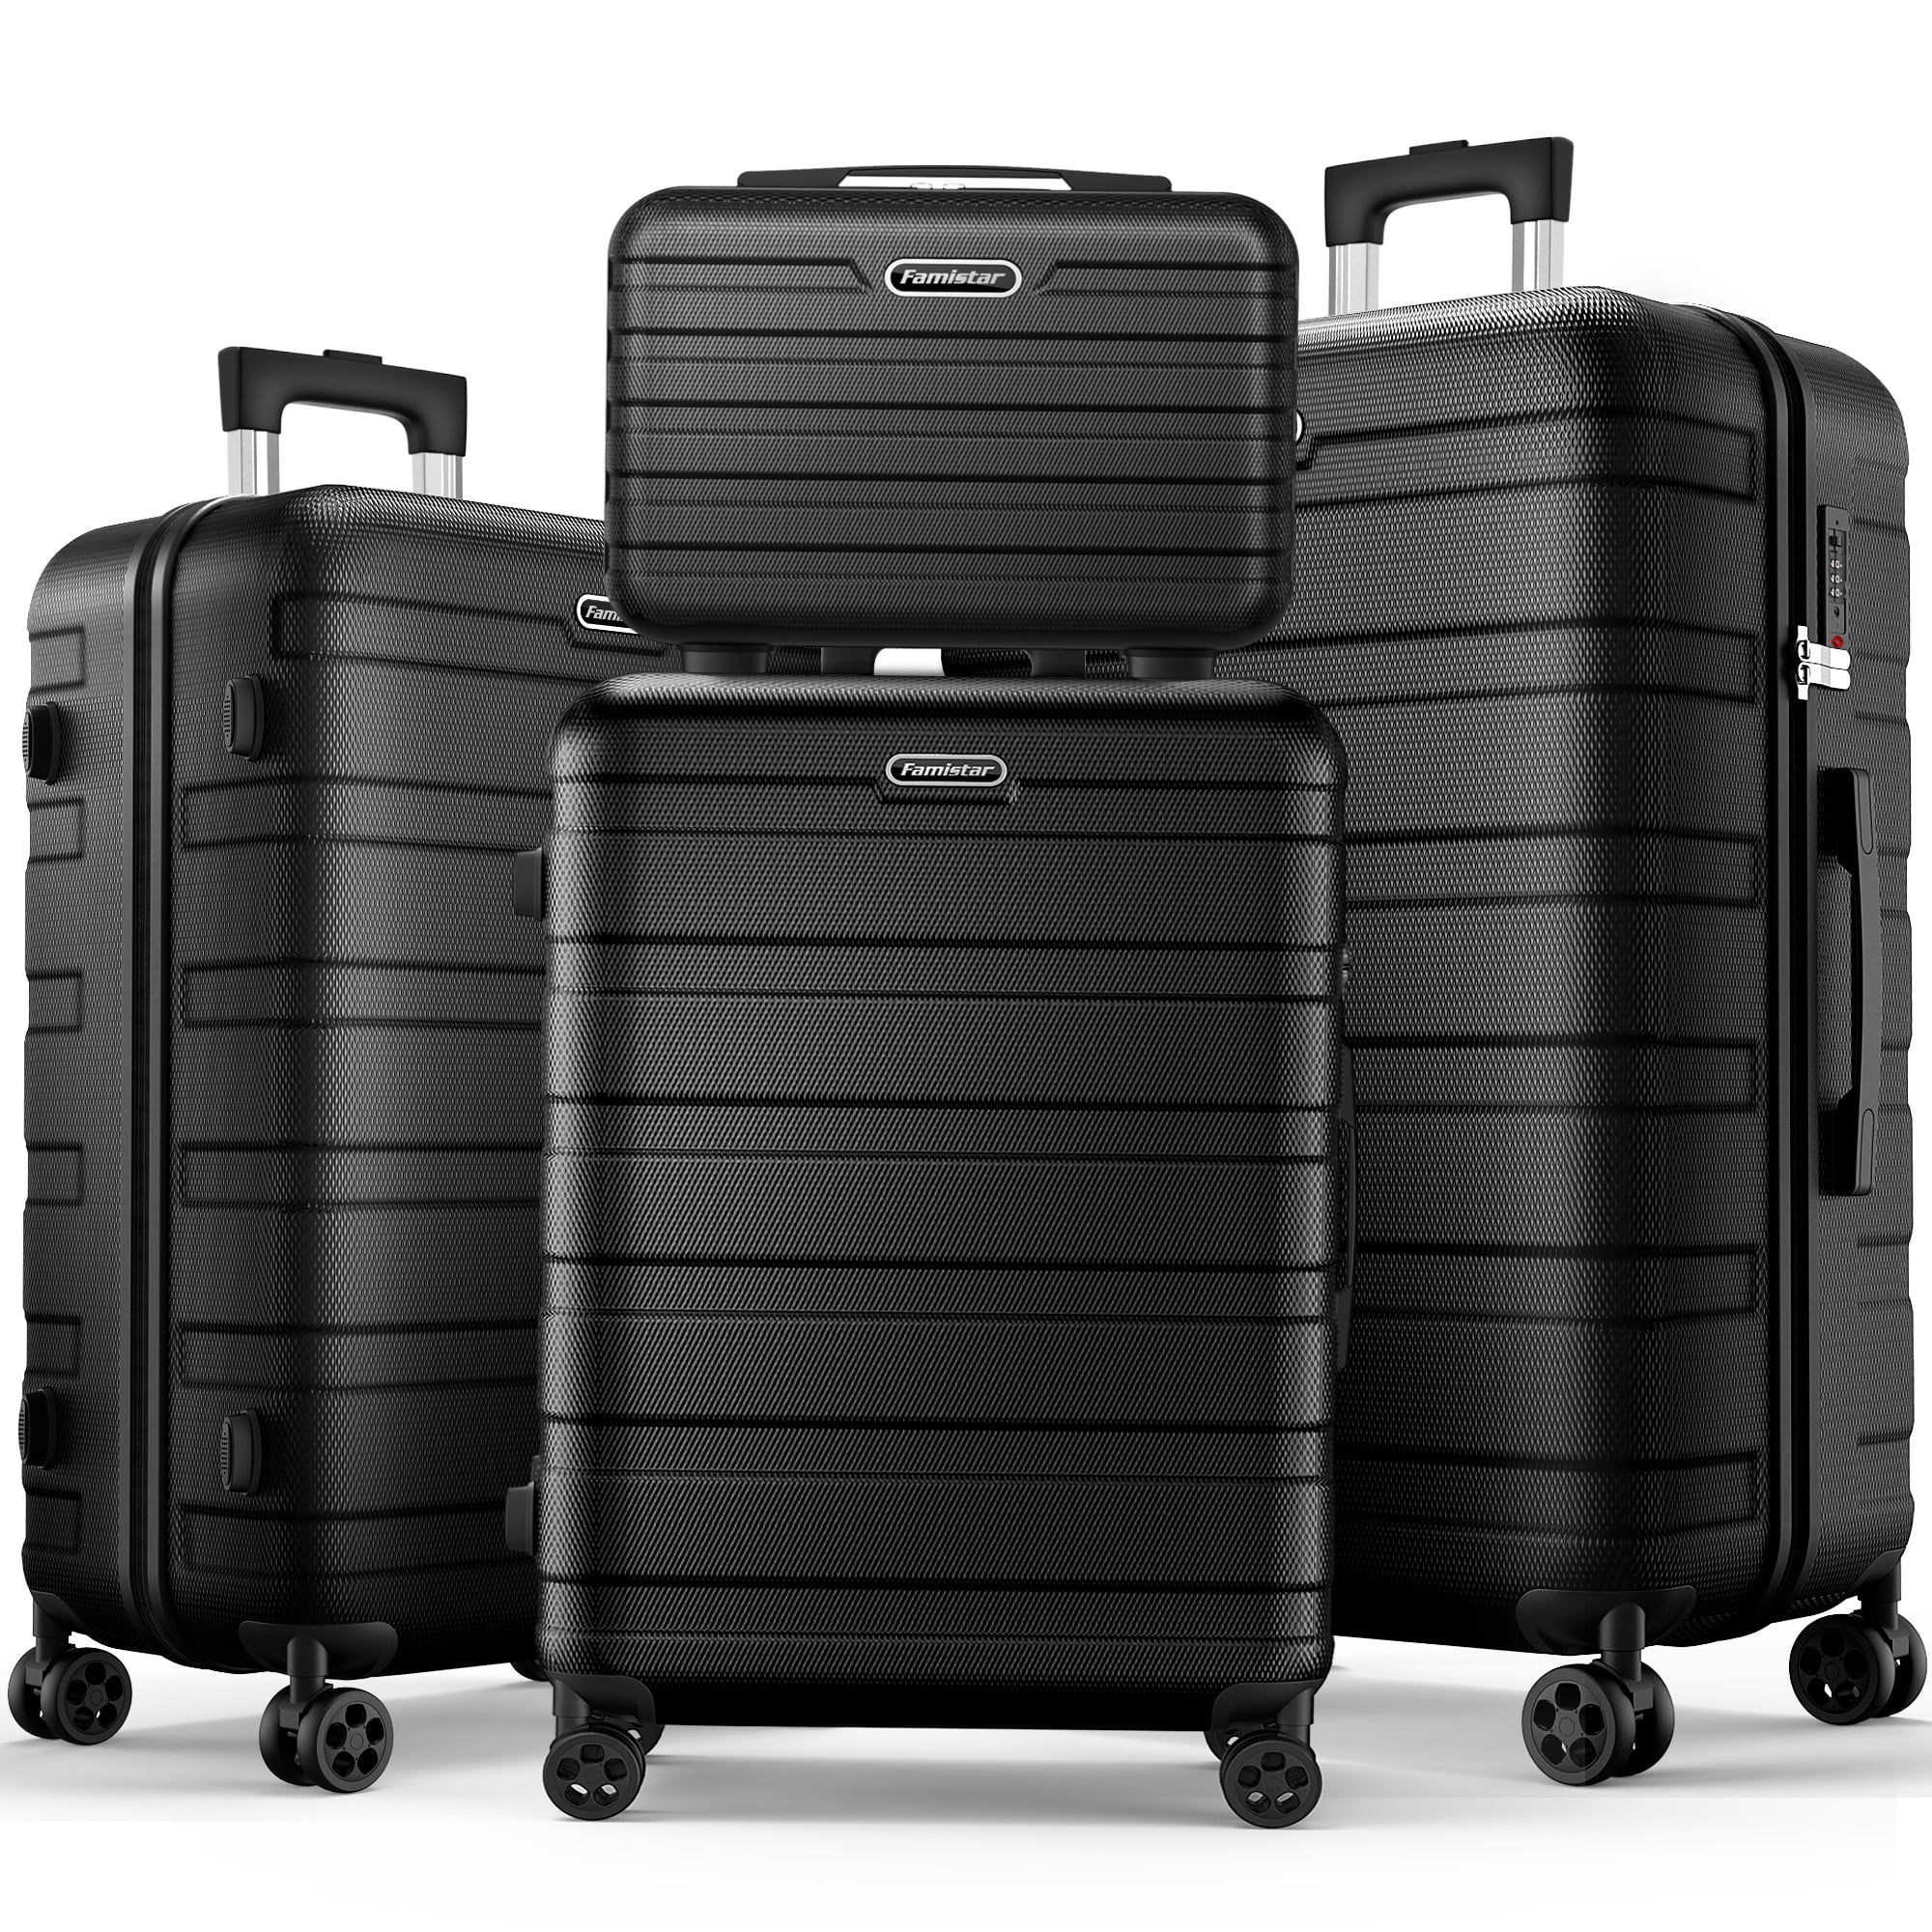 Famistar Luggage Sets Expandable Lightweight Suitcases with Wheels ABS ...